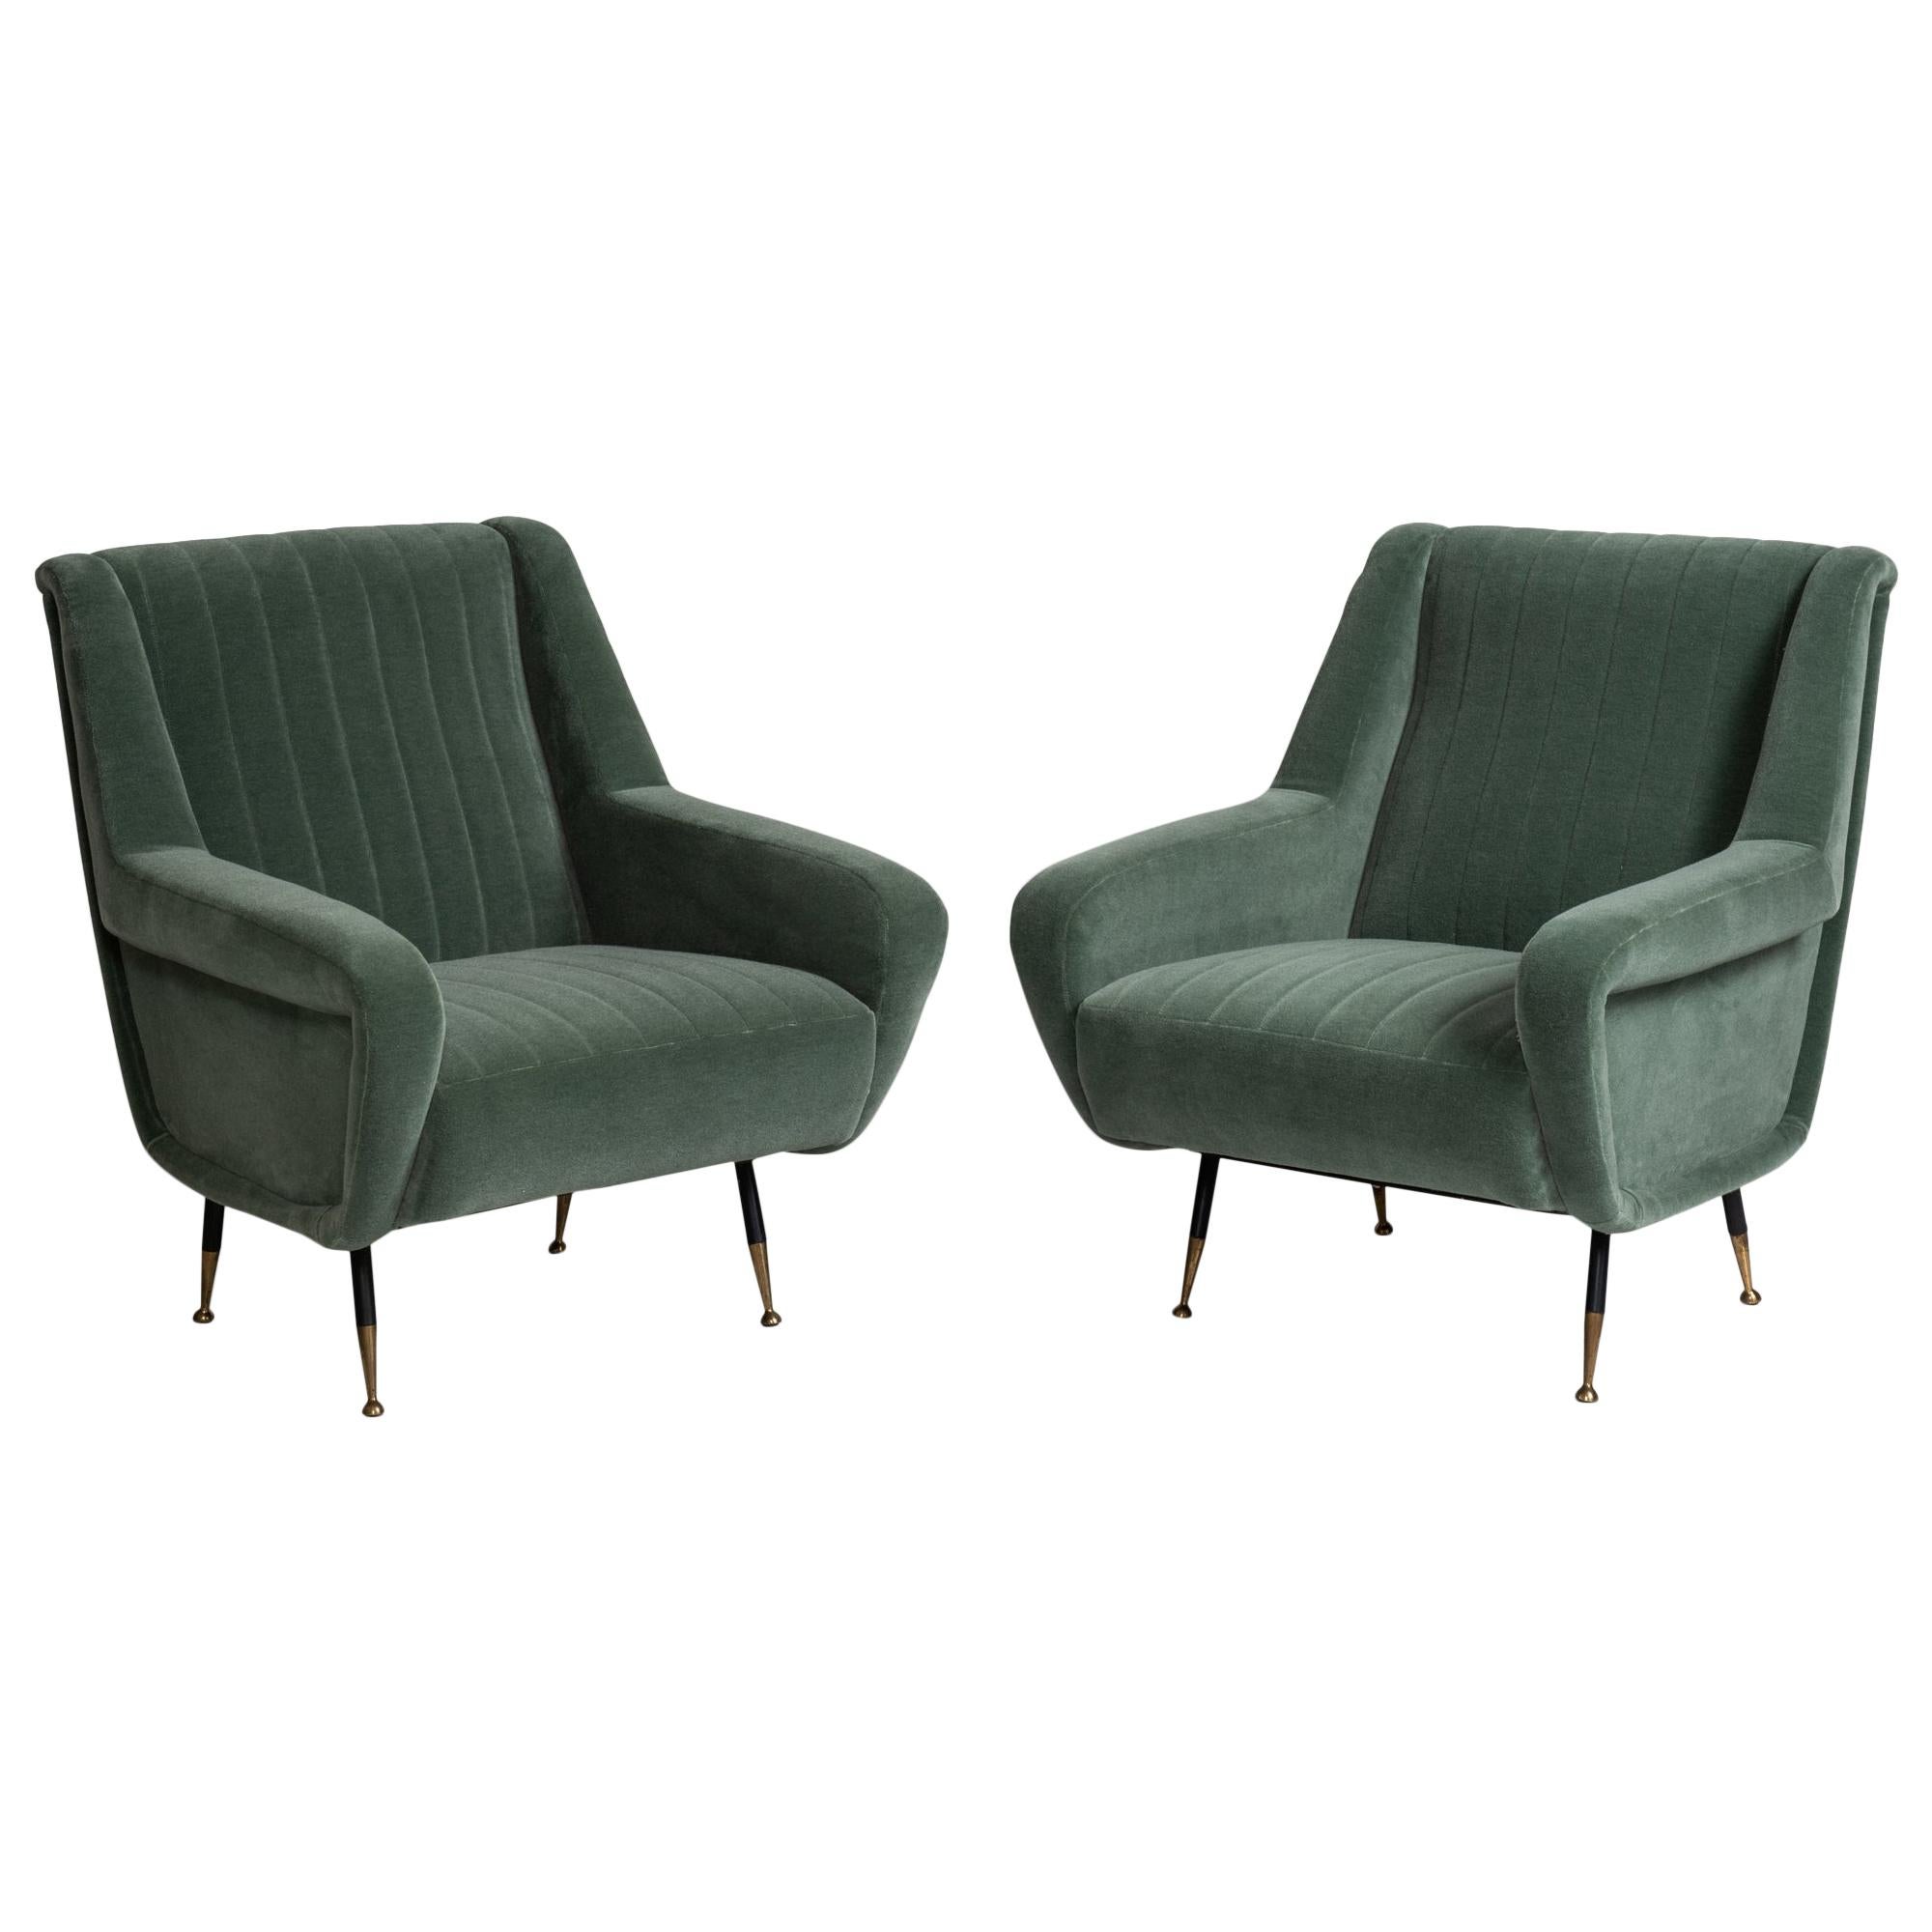 Pair of Channeled Mohair Armchairs